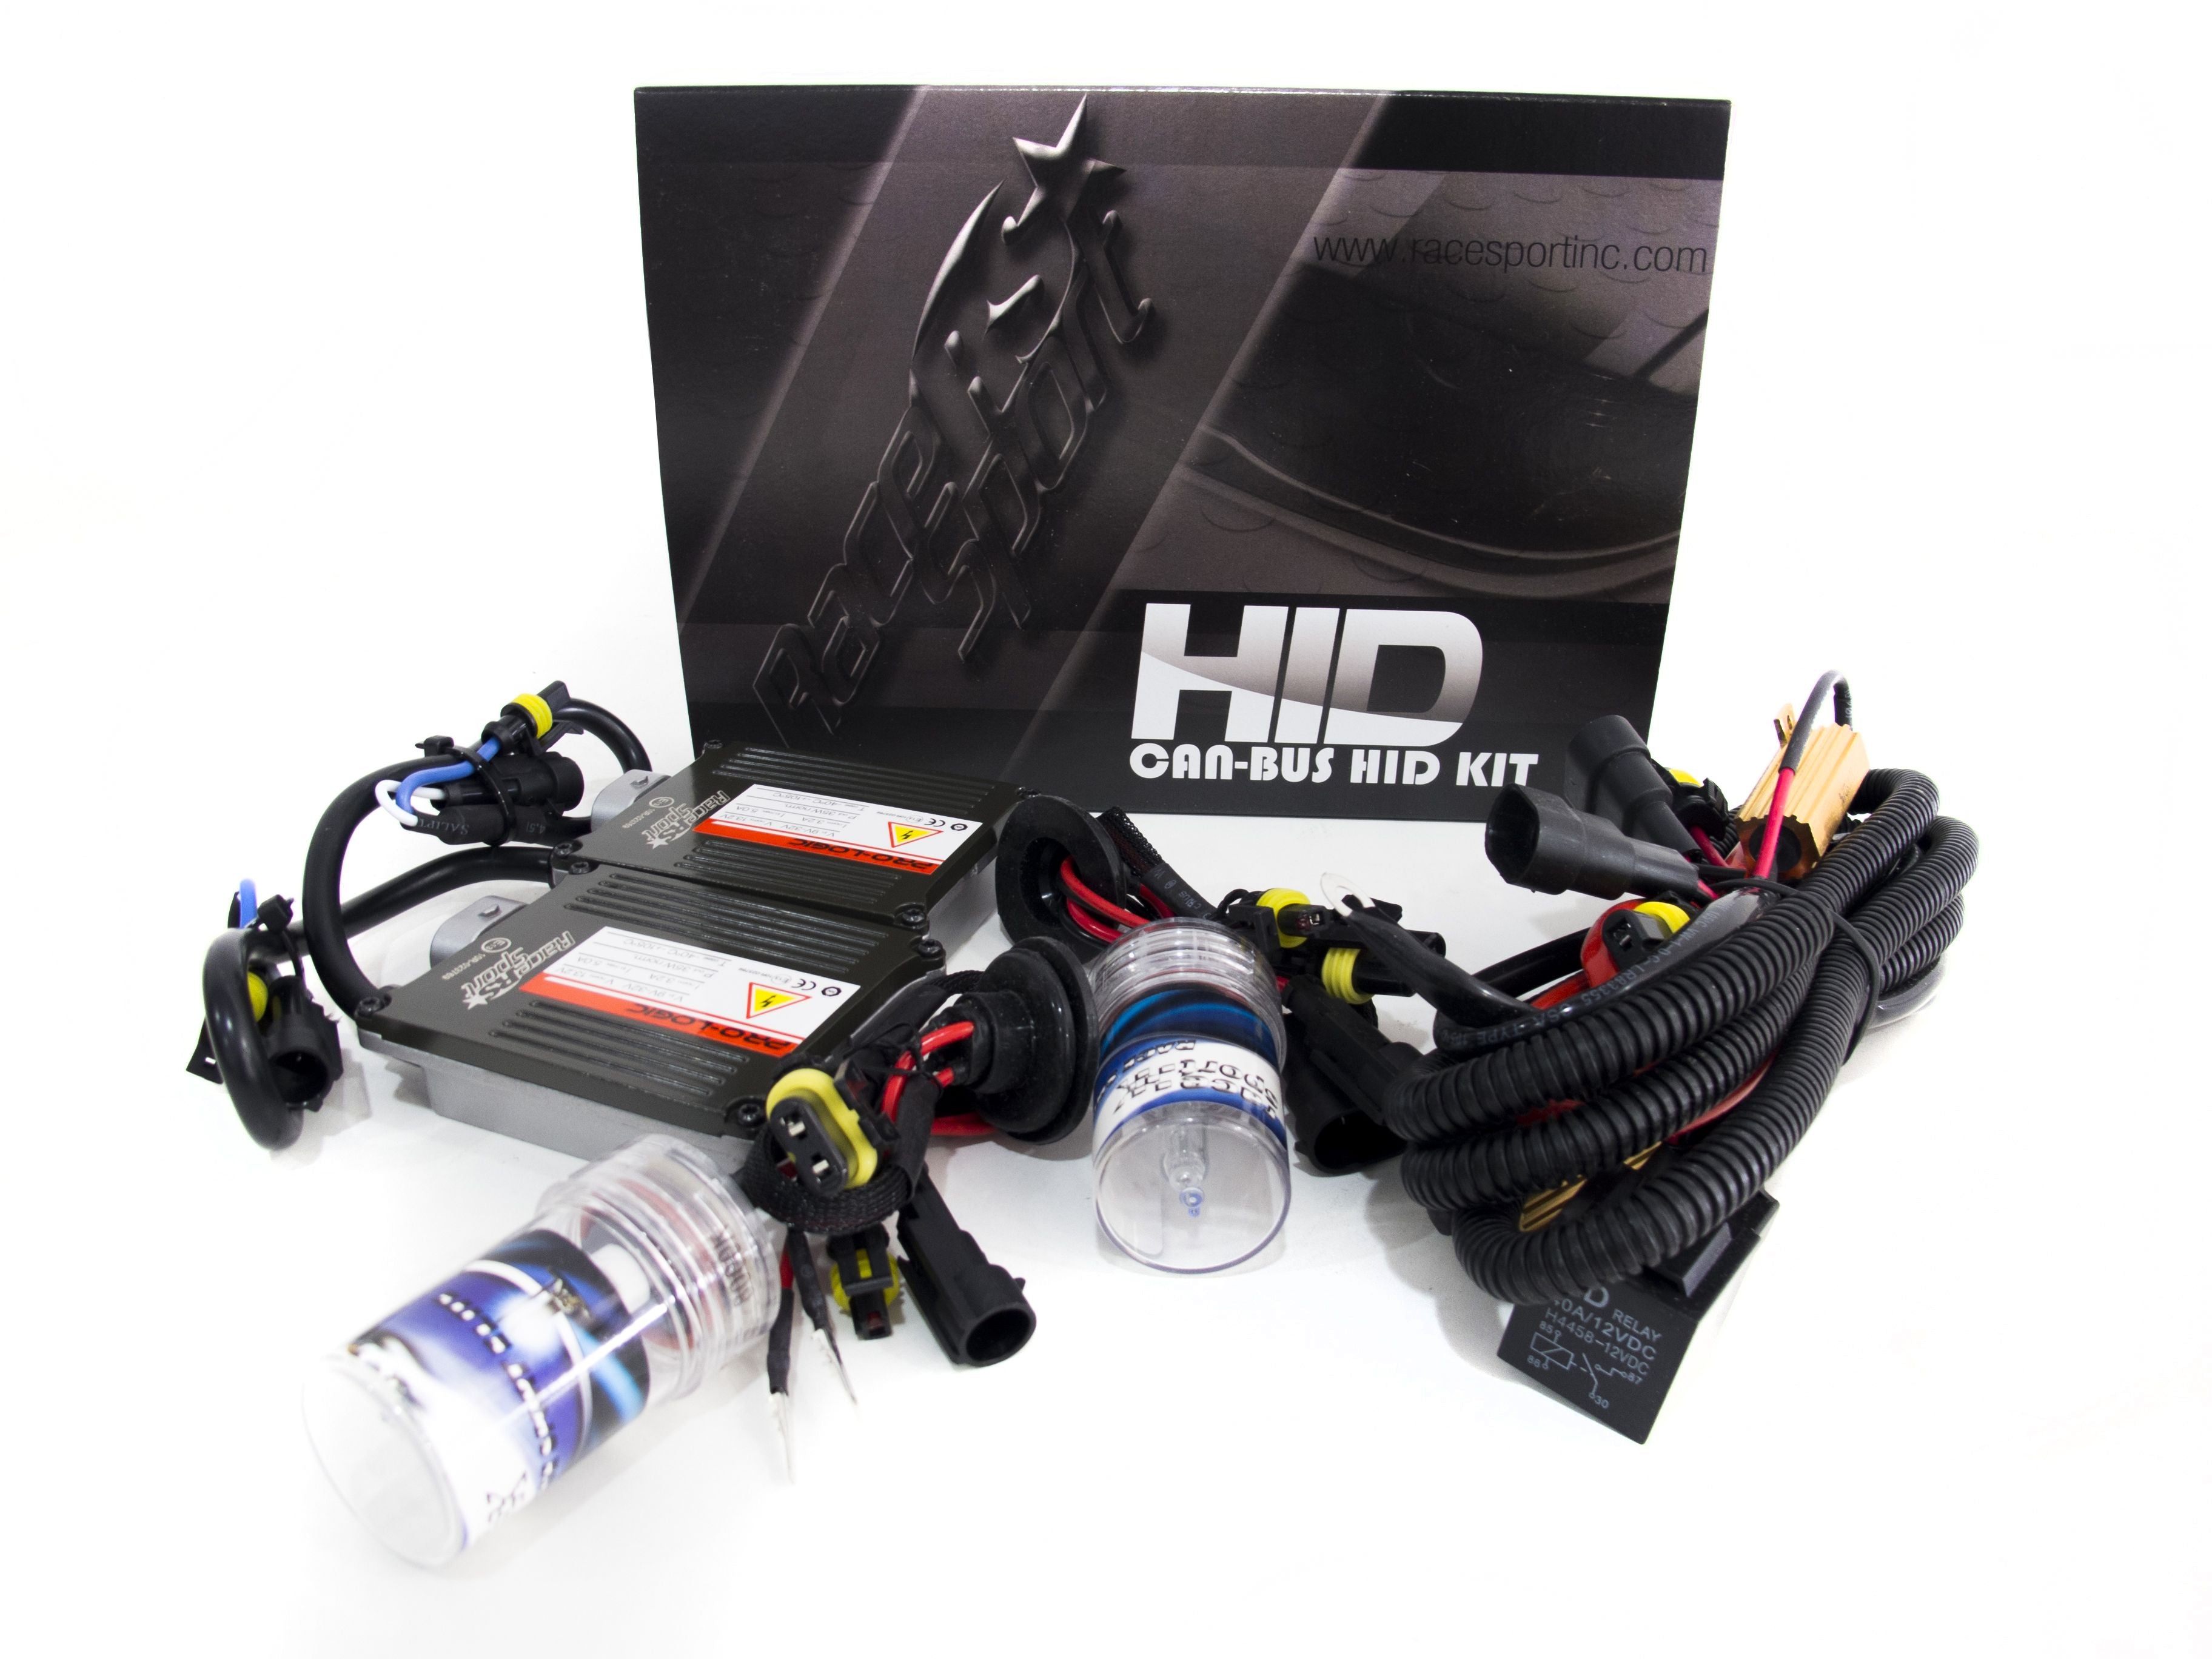 Race Sport H1 GEN 1 Canbus HID Mid-Slim Ballast Kit with Relay Resistor Harness H1-12K-G1-CANBUS-R